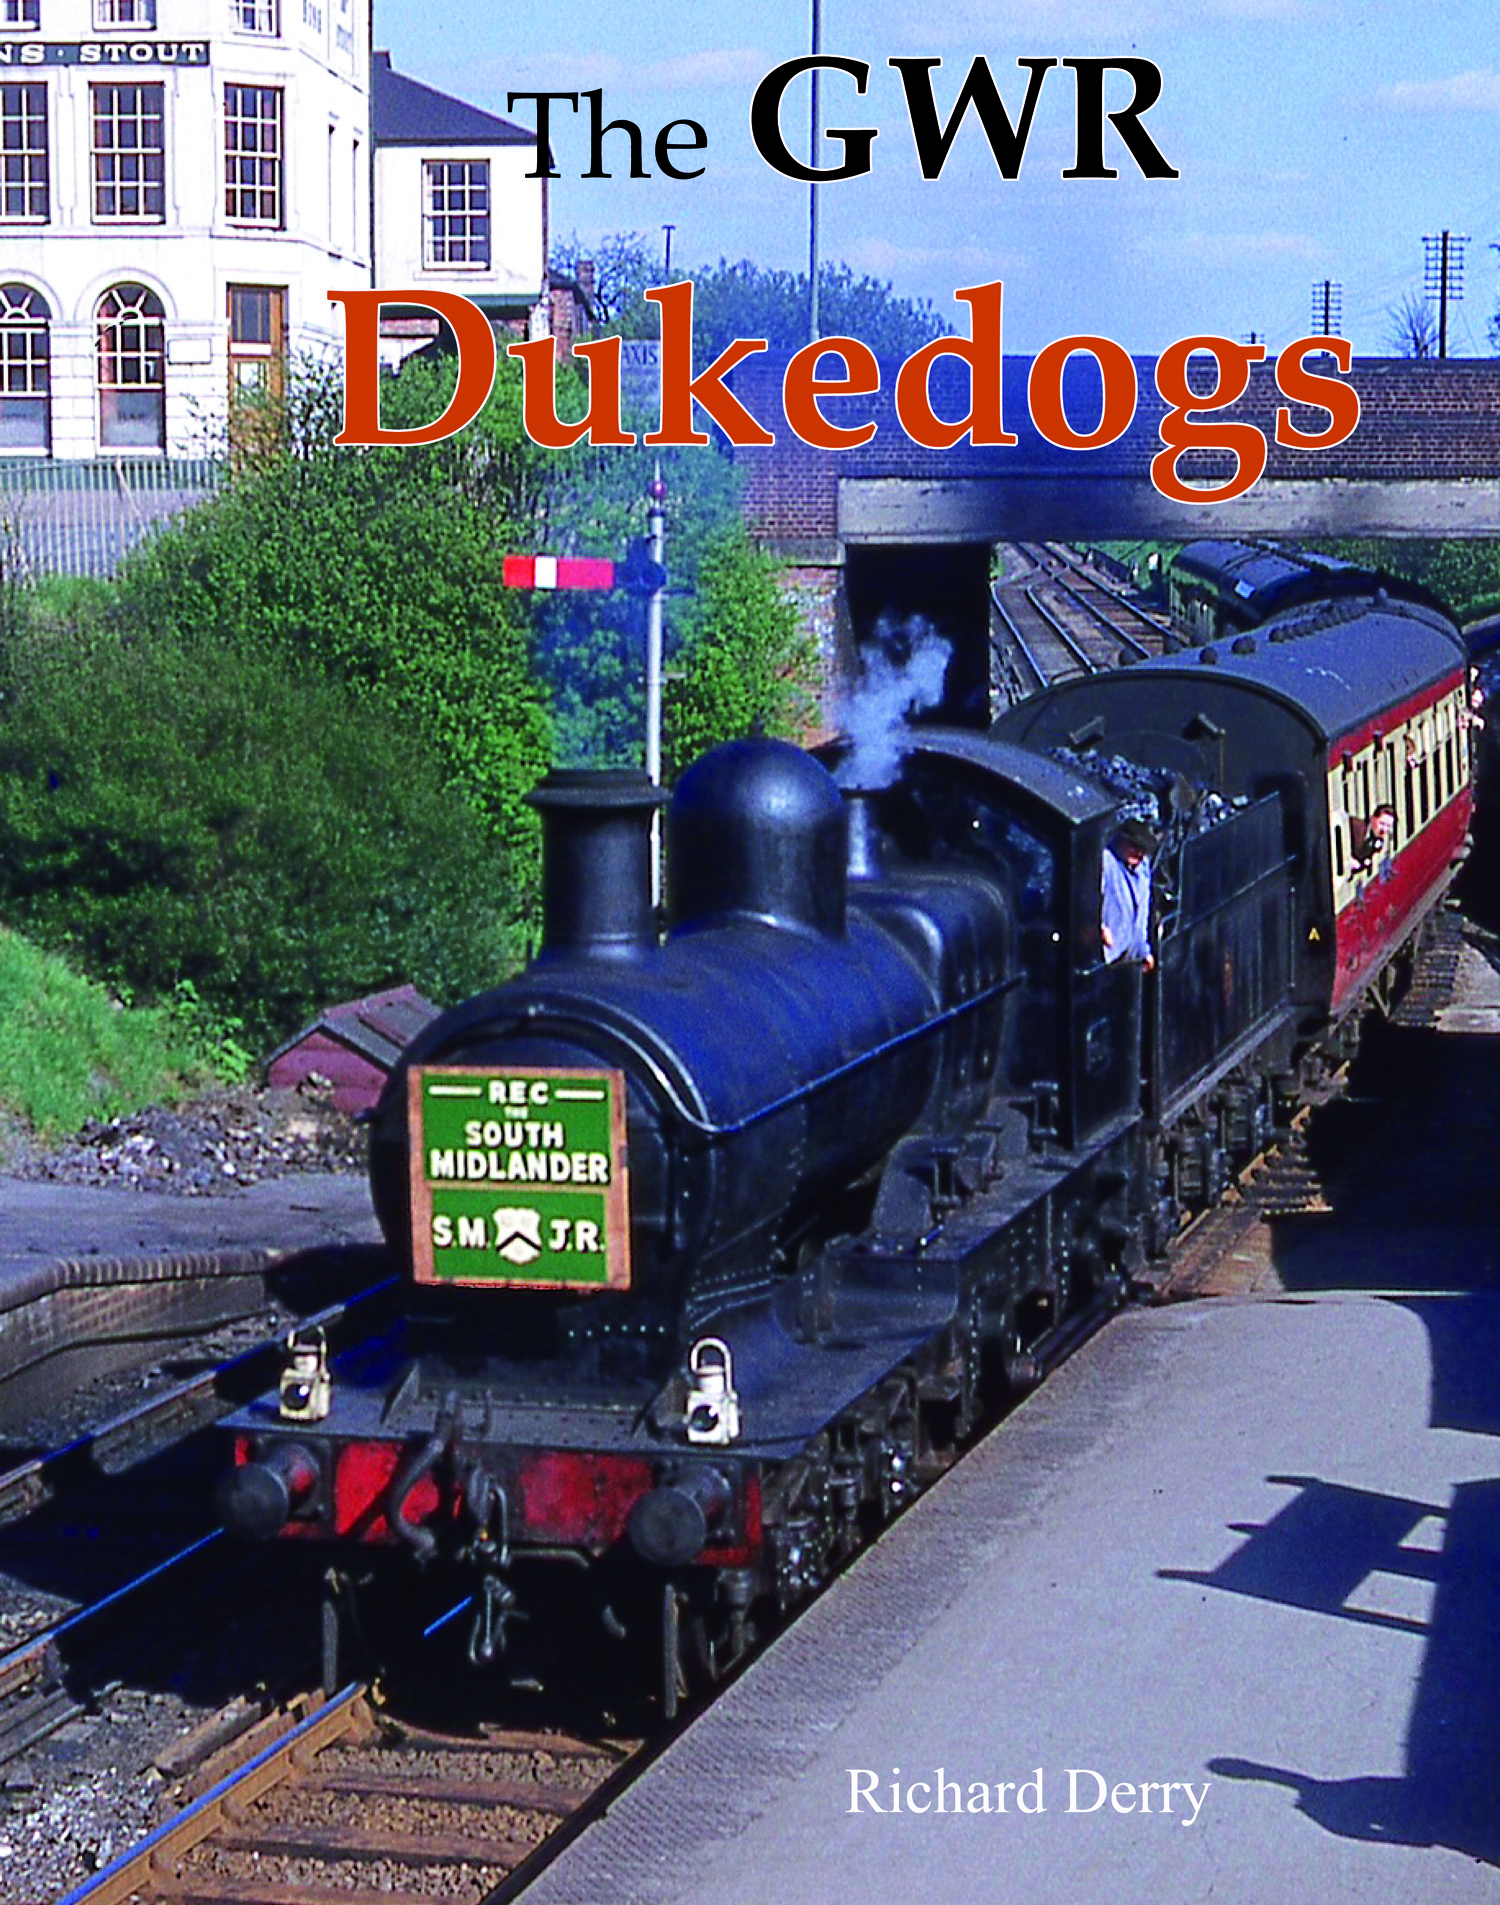 The GWR Dukedogs